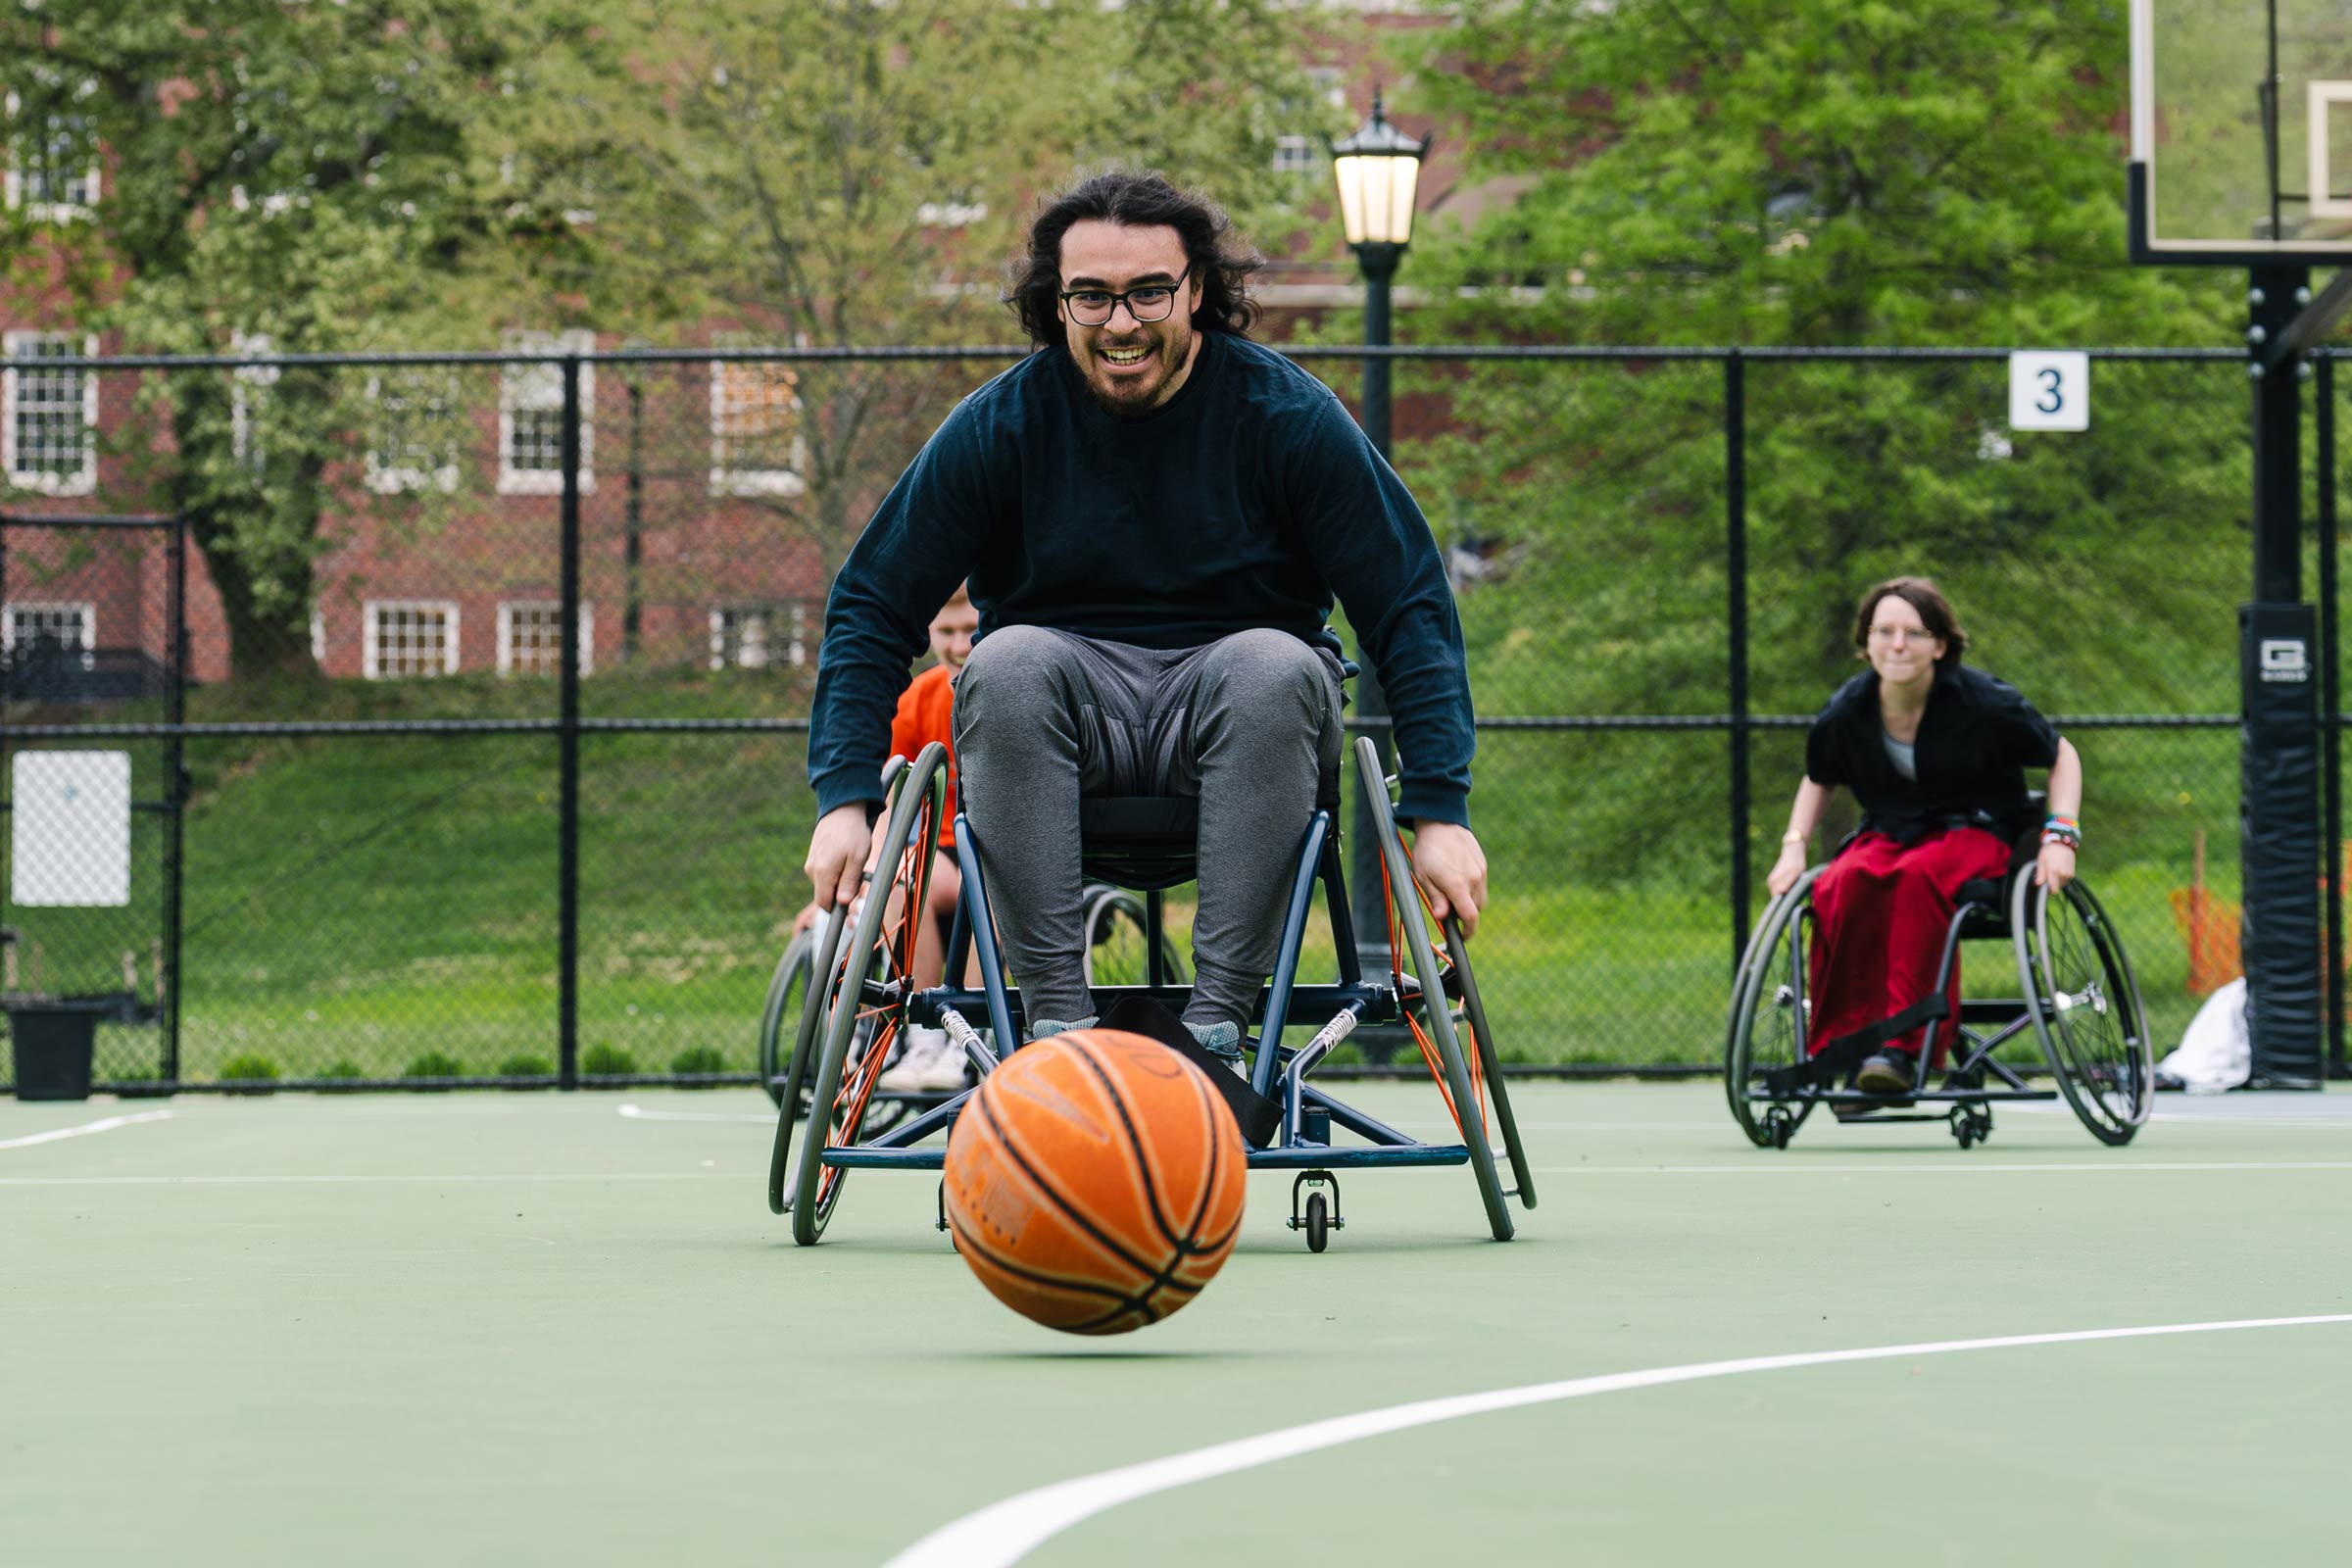 Picture of an individual with disabilities playing wheelchair basketball.